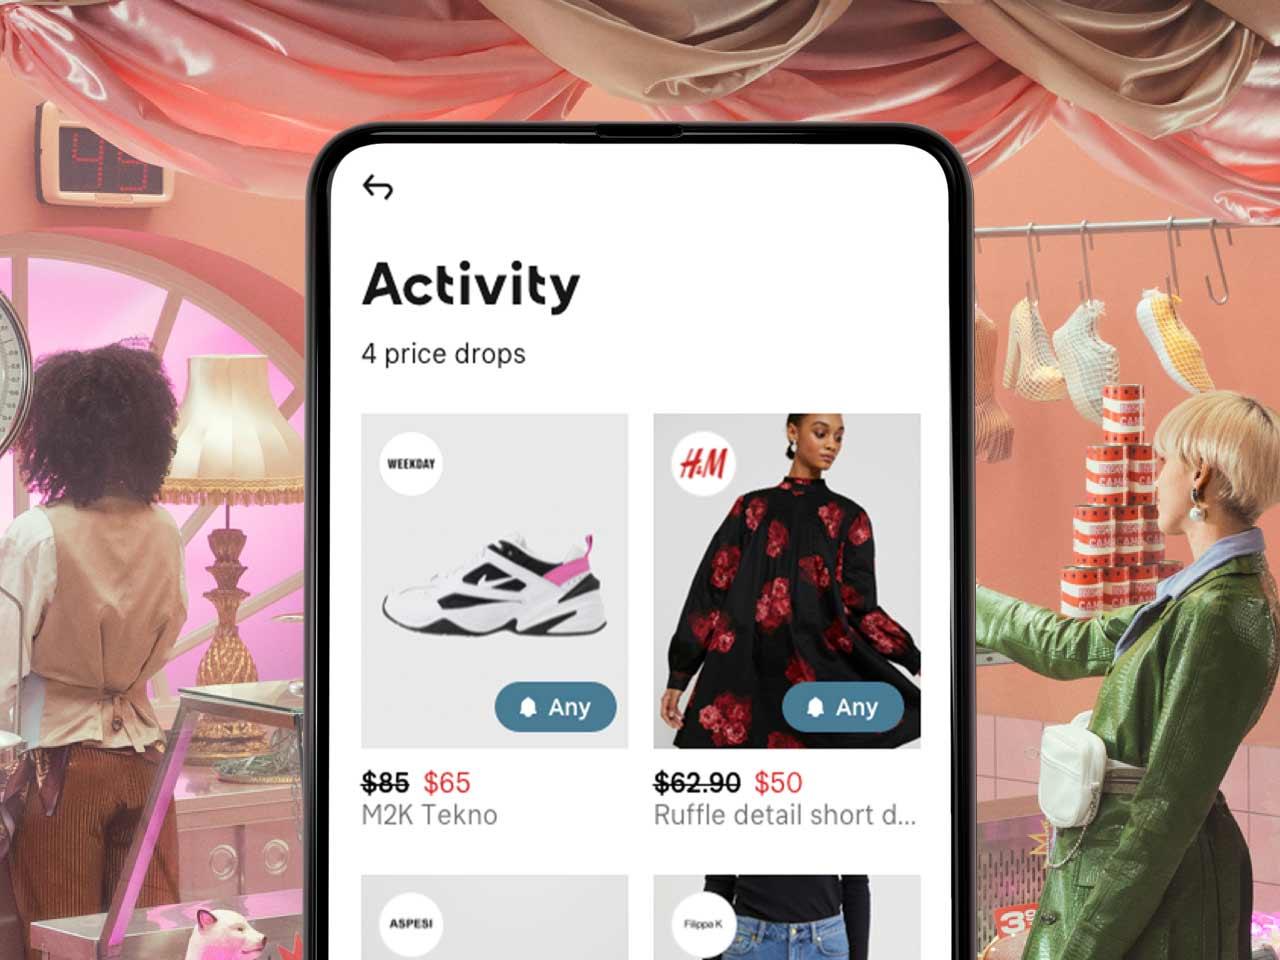 Image showing wishlist price drops and shopping scene